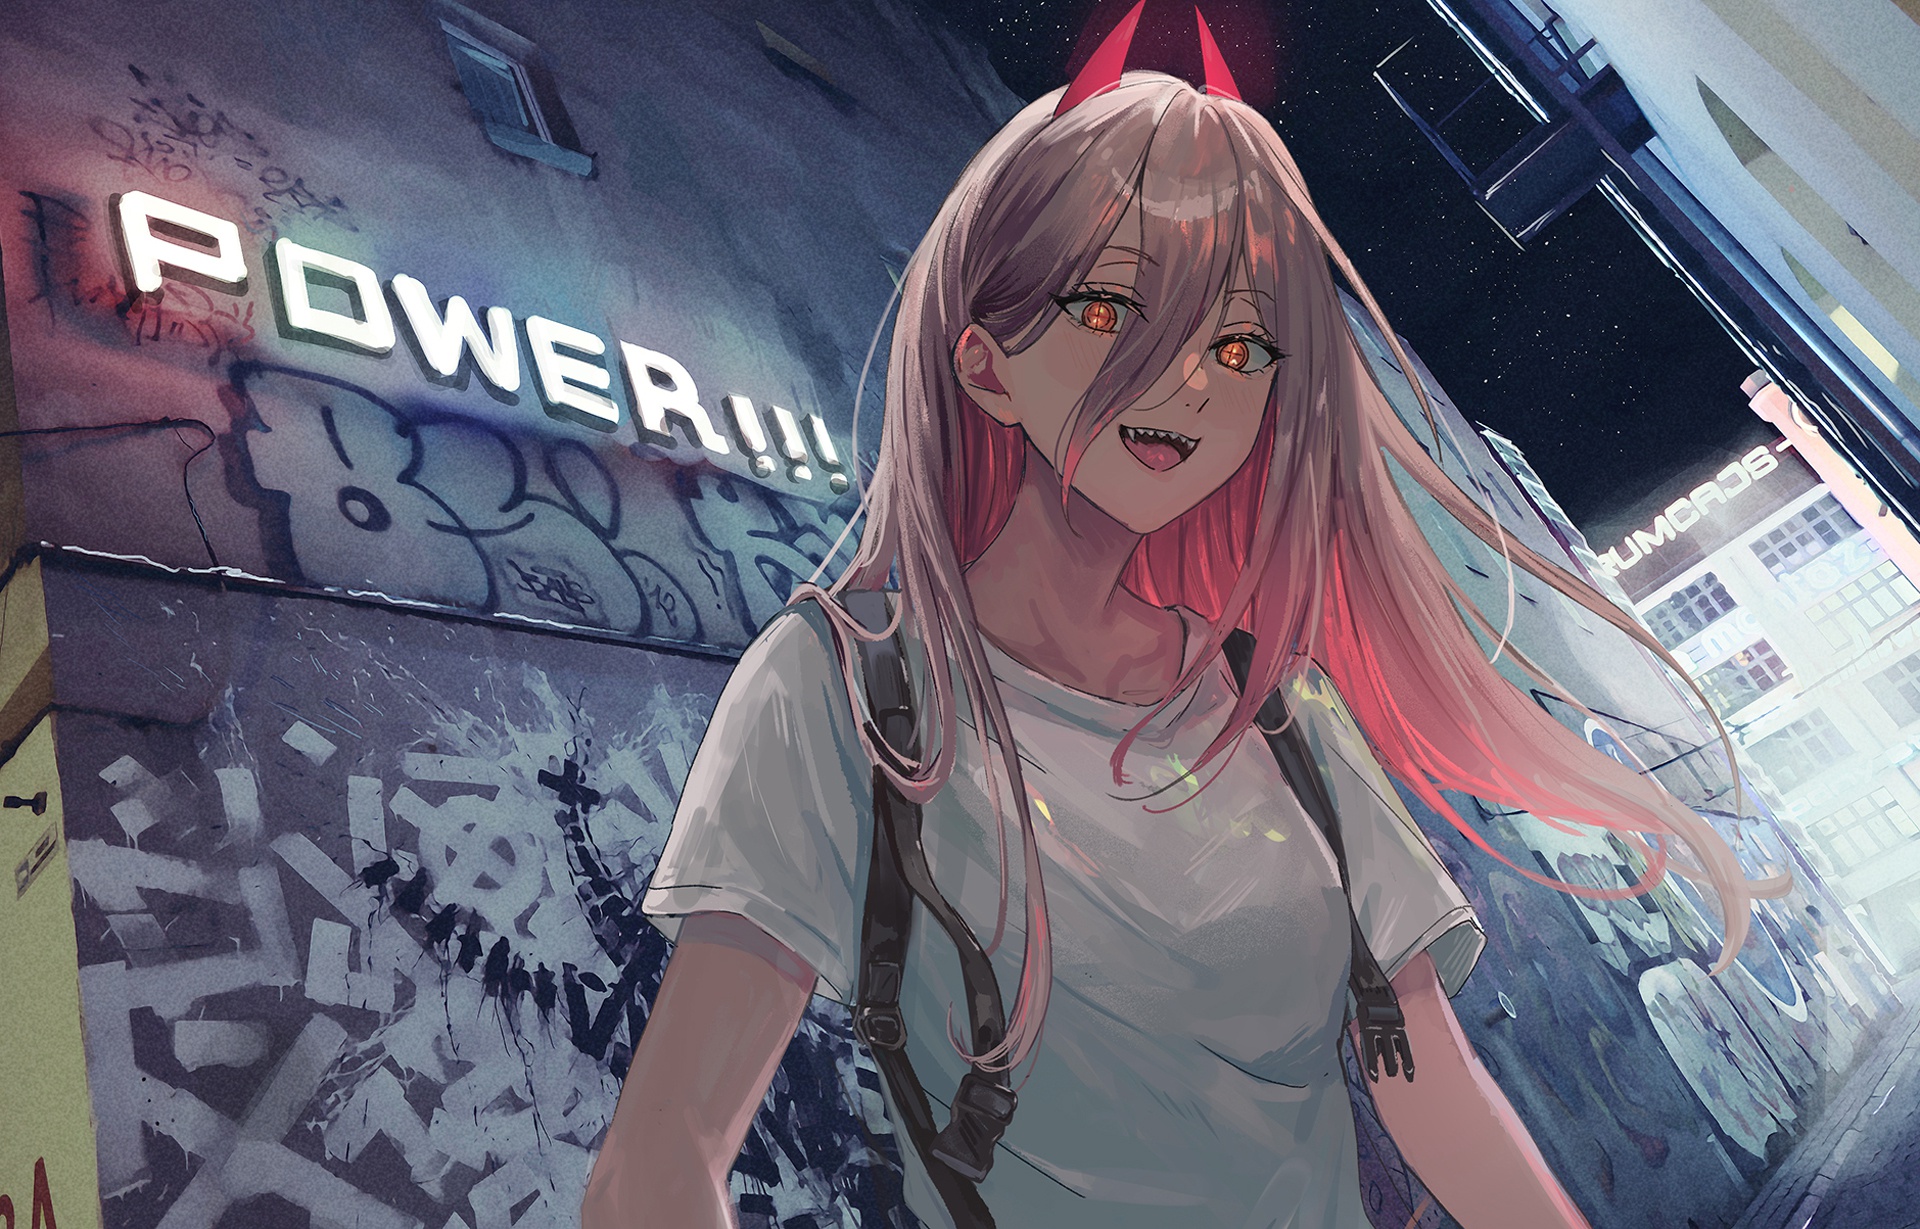 Power Chainsaw Man Graffiti Alleyway Backpacks Looking At Viewer Chainsaw Man Pink Hair Anime Girls 1920x1229